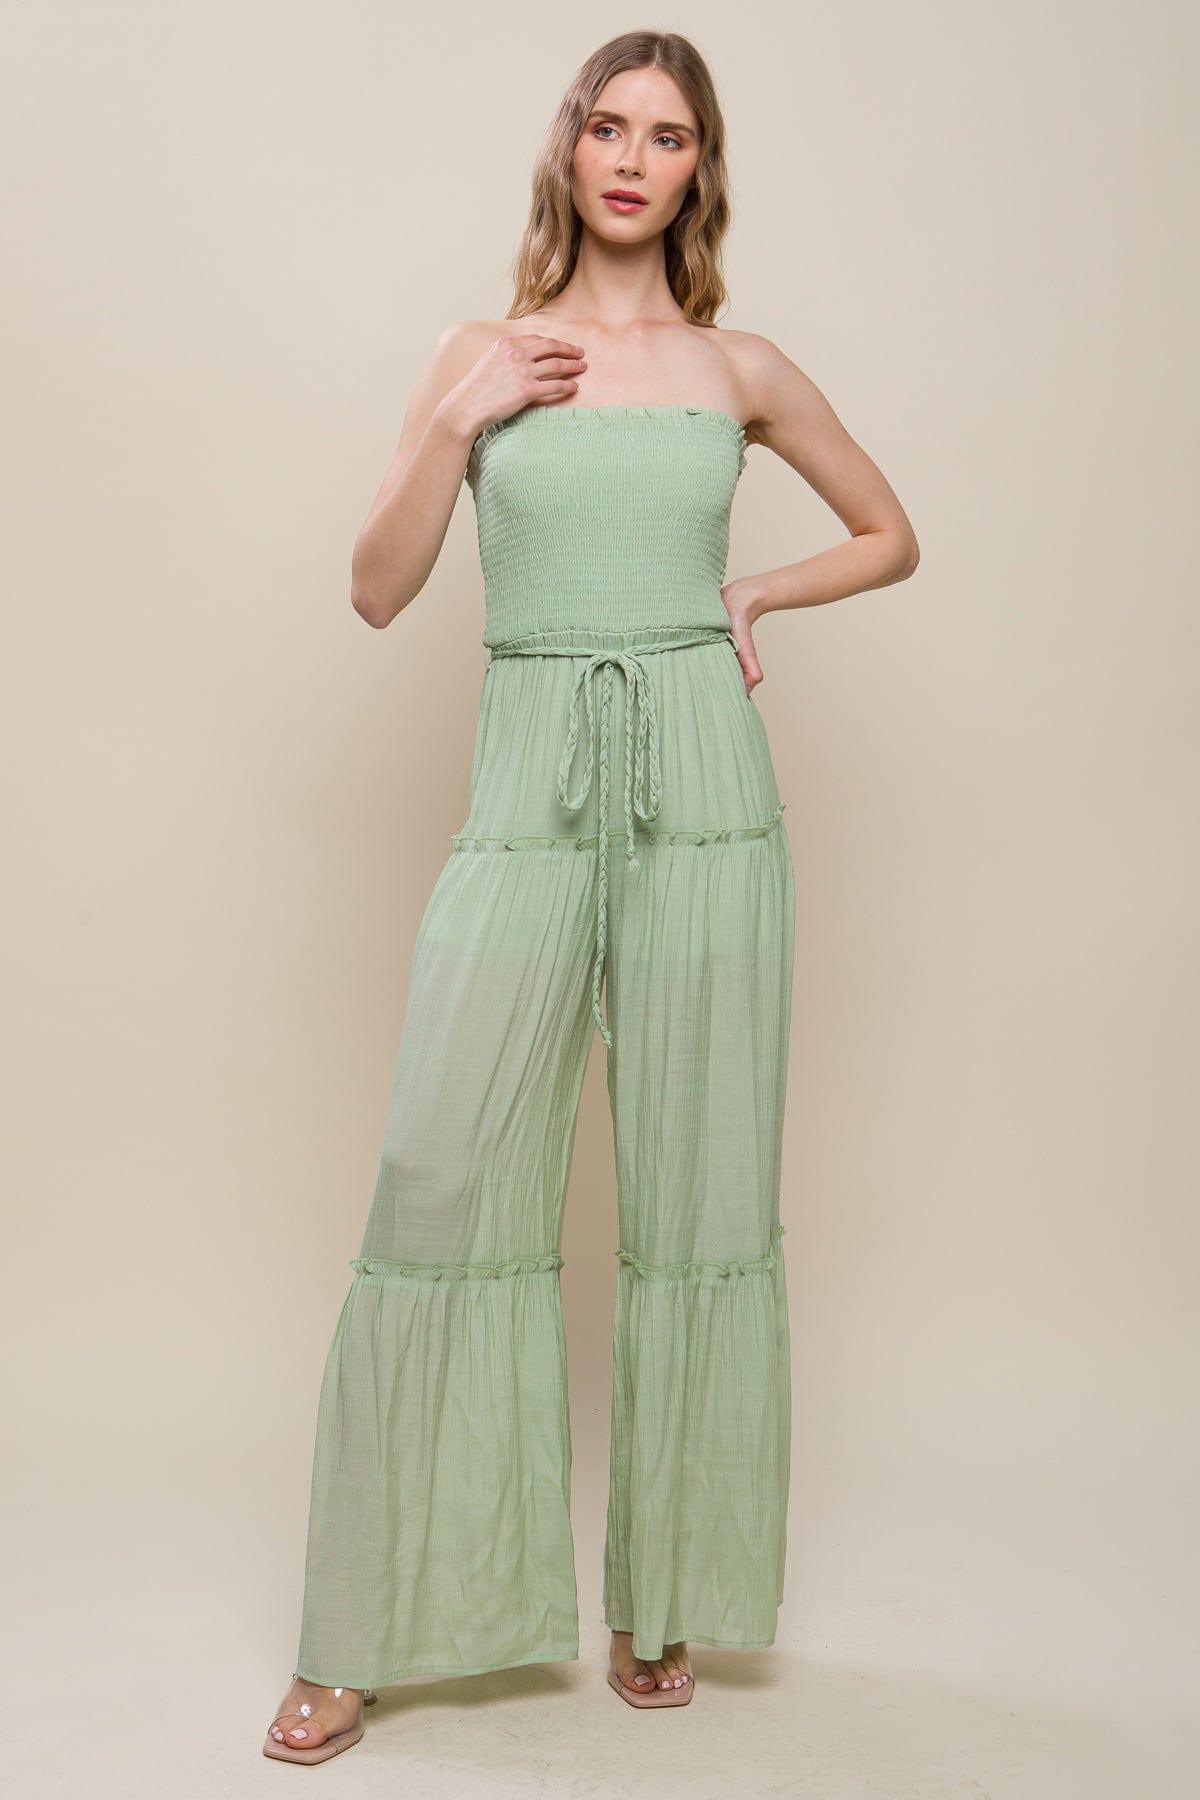 SAVLUXE Jumpsuits & Rompers Celery Woven Solid Sleeveless Smocked Ruffle Jumpsuit